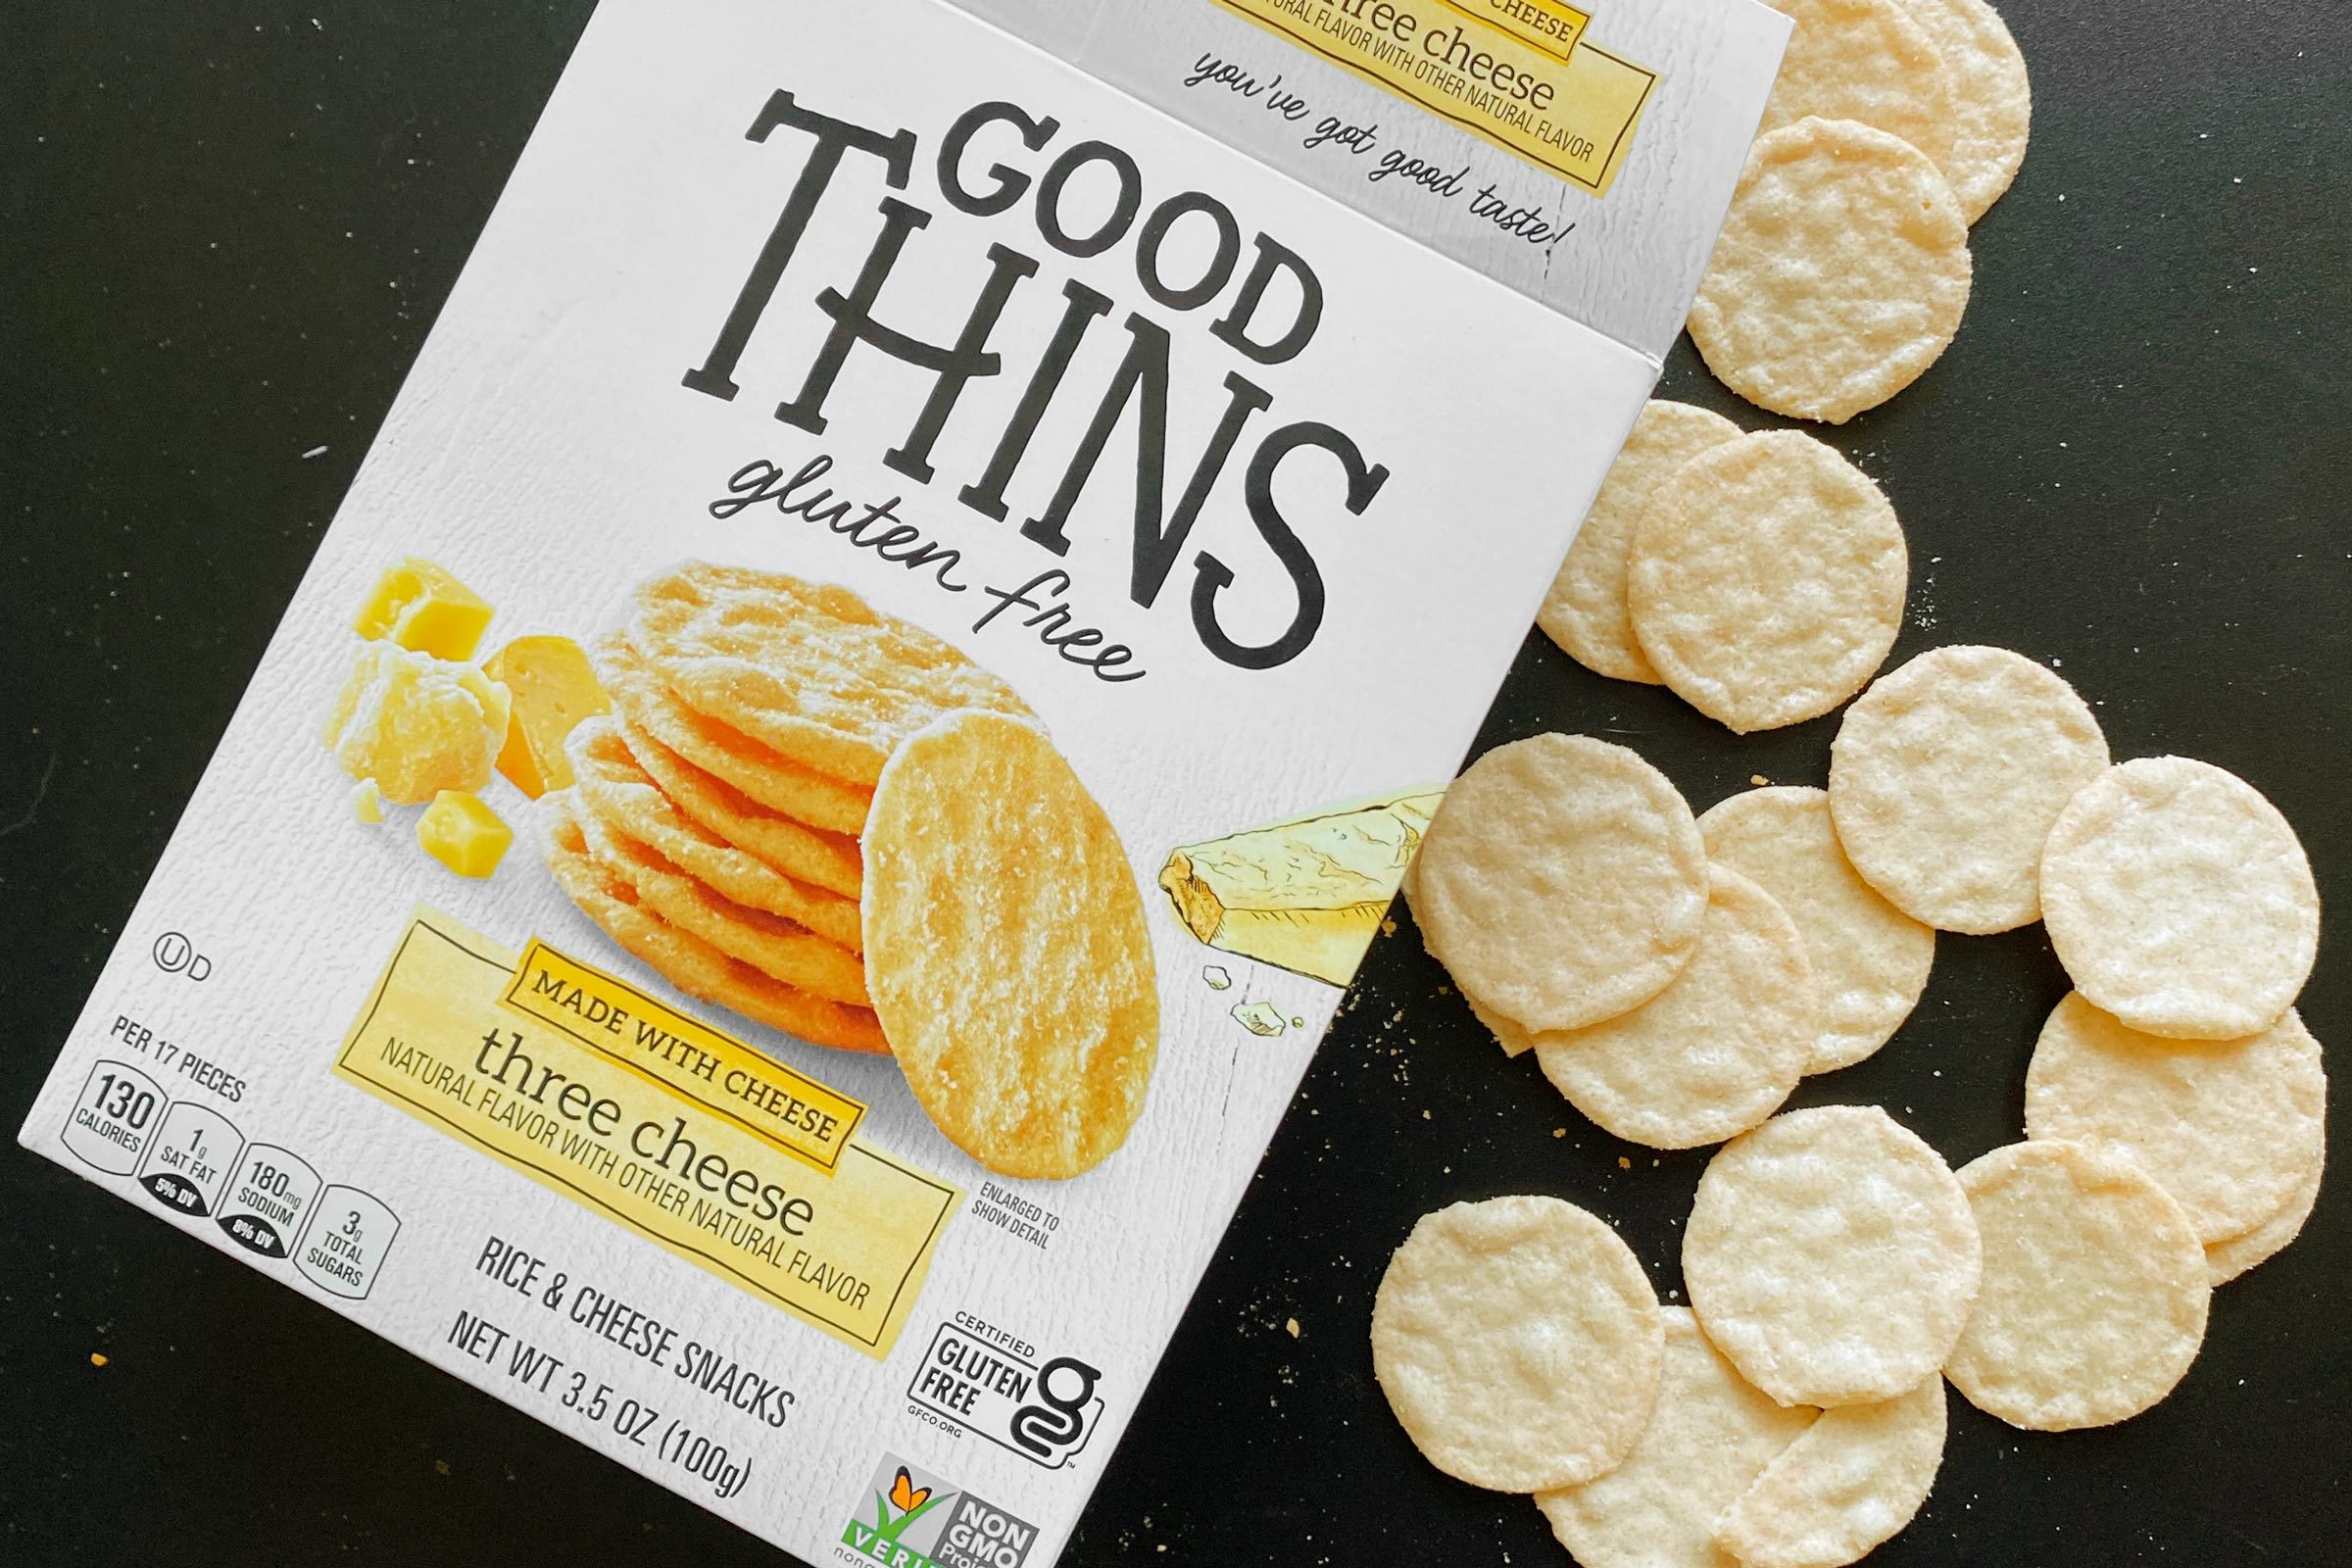 Good Thins Rice Thins Simply Salt Saltines, 100g/3.5oz, (Imported from  Canada)